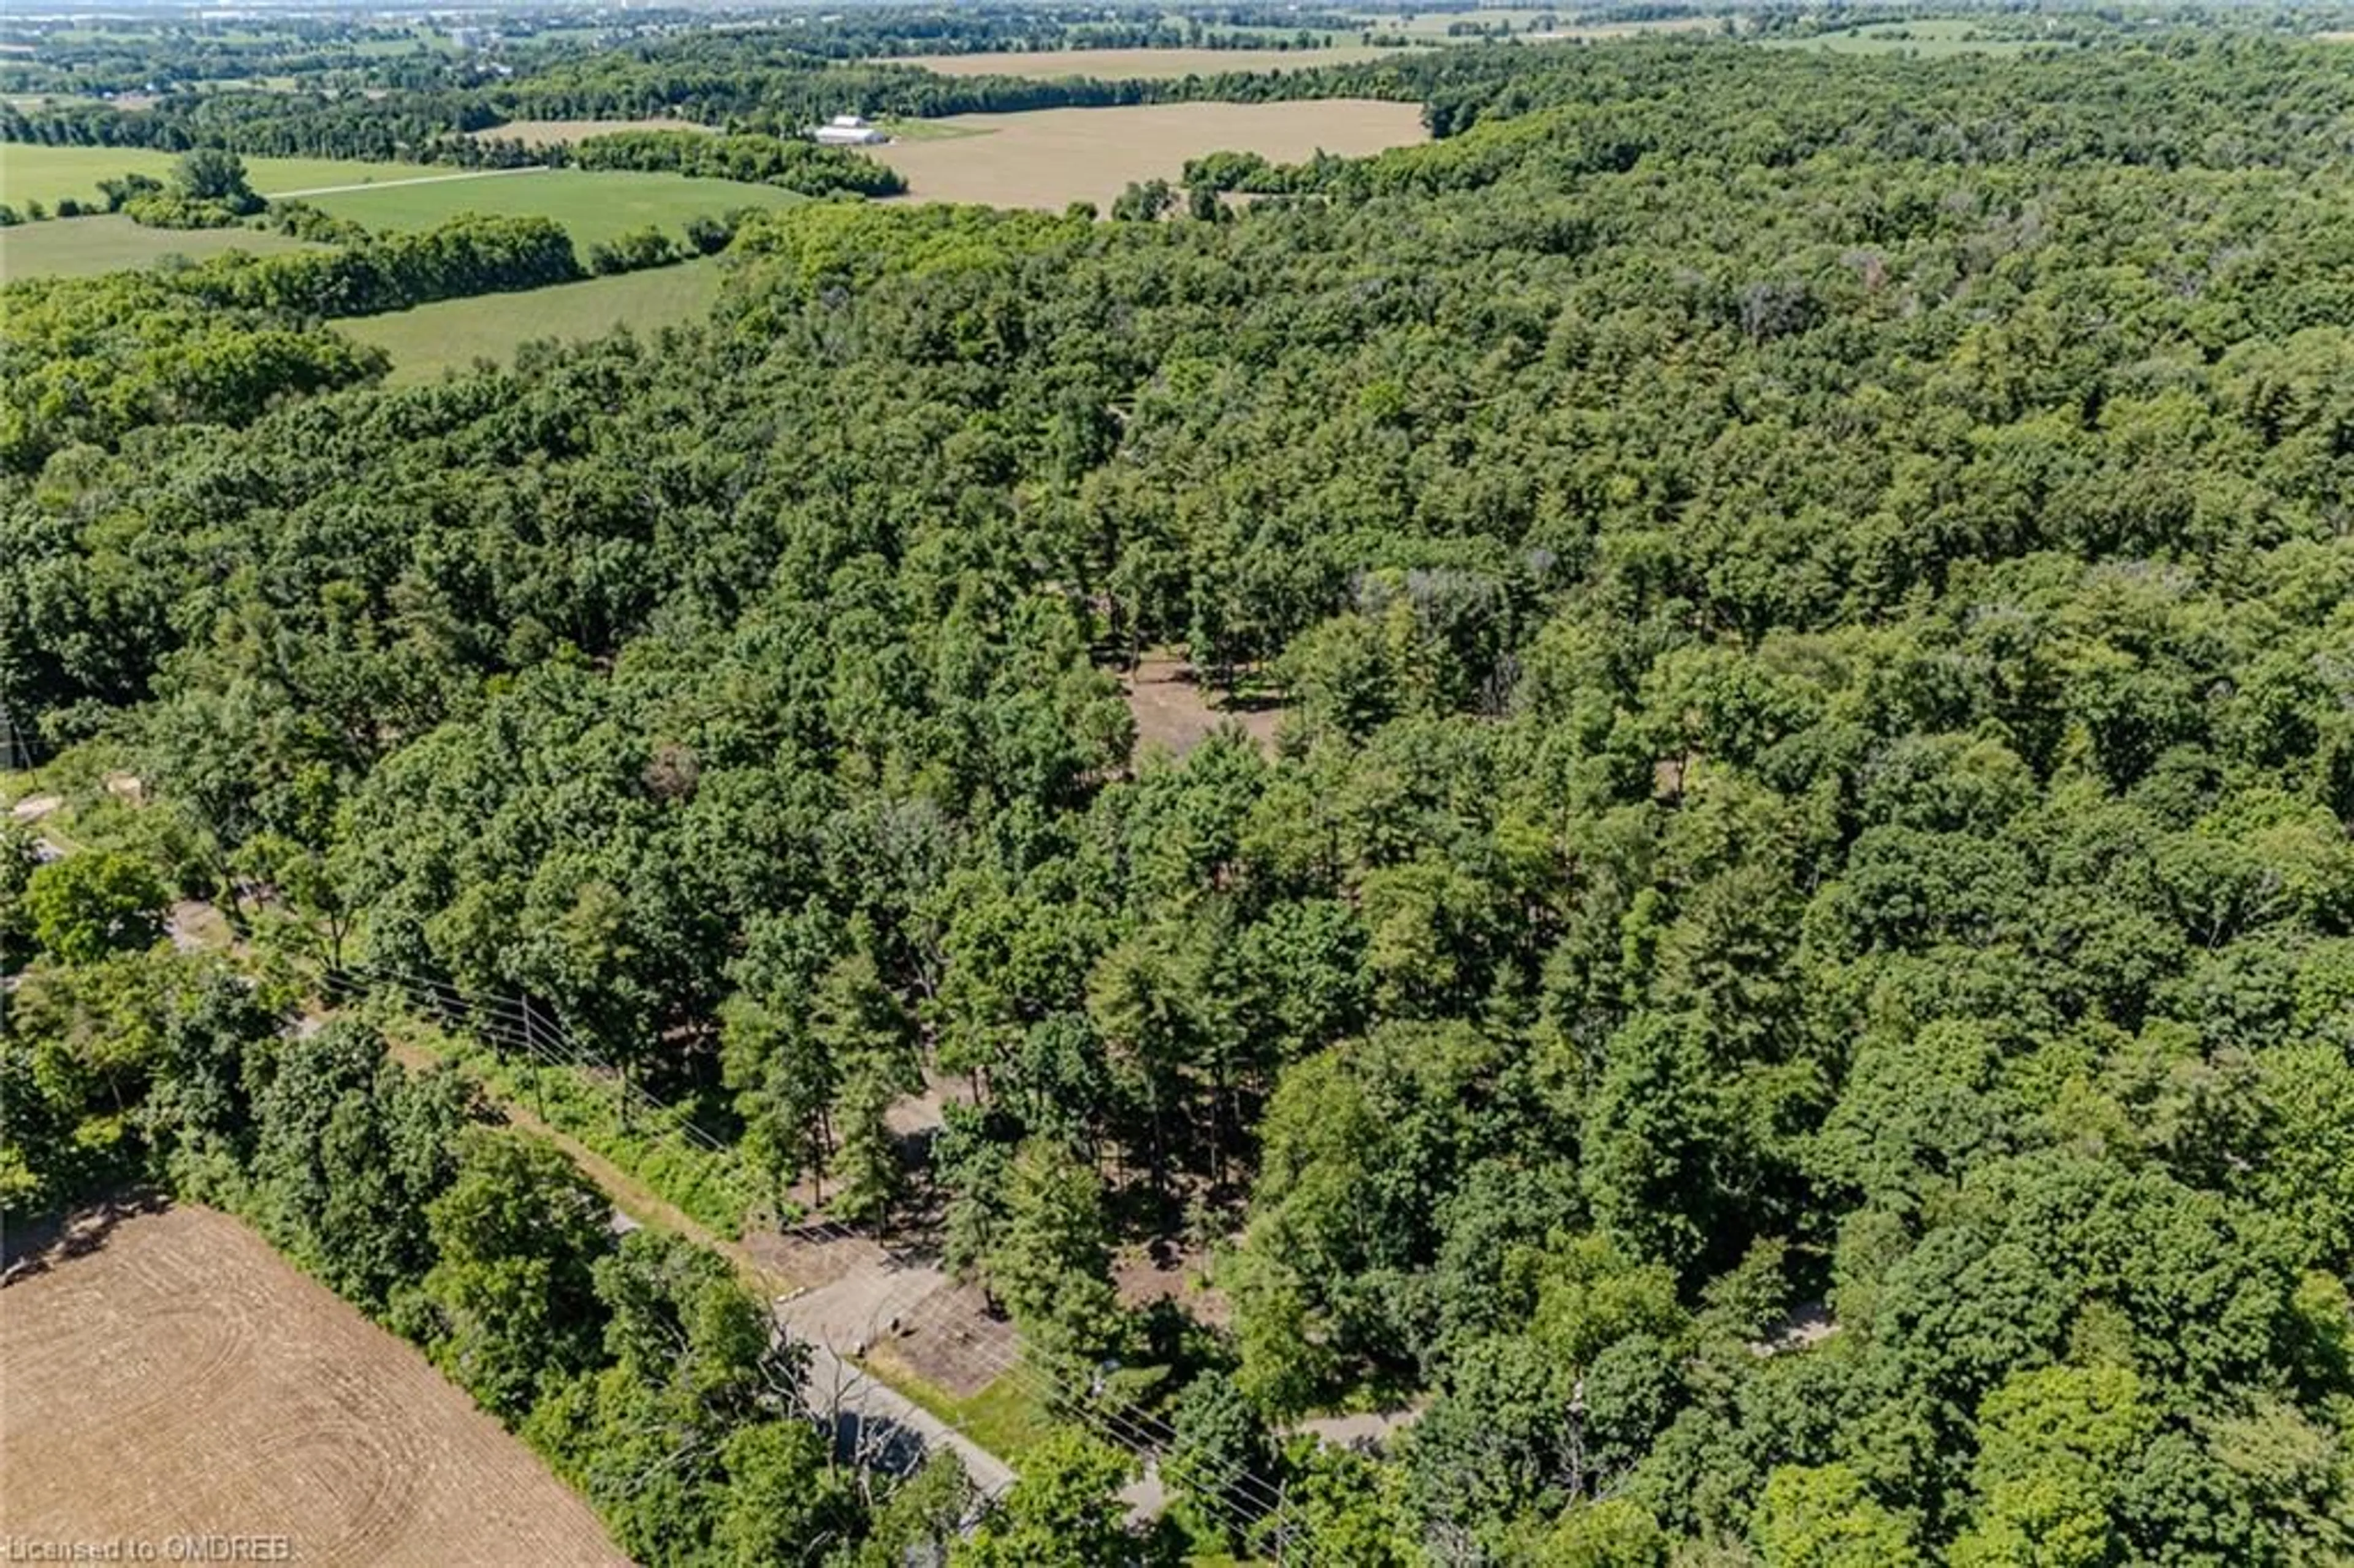 Forest view for 155 Clarke Road, Paris Ontario N3L 3E1